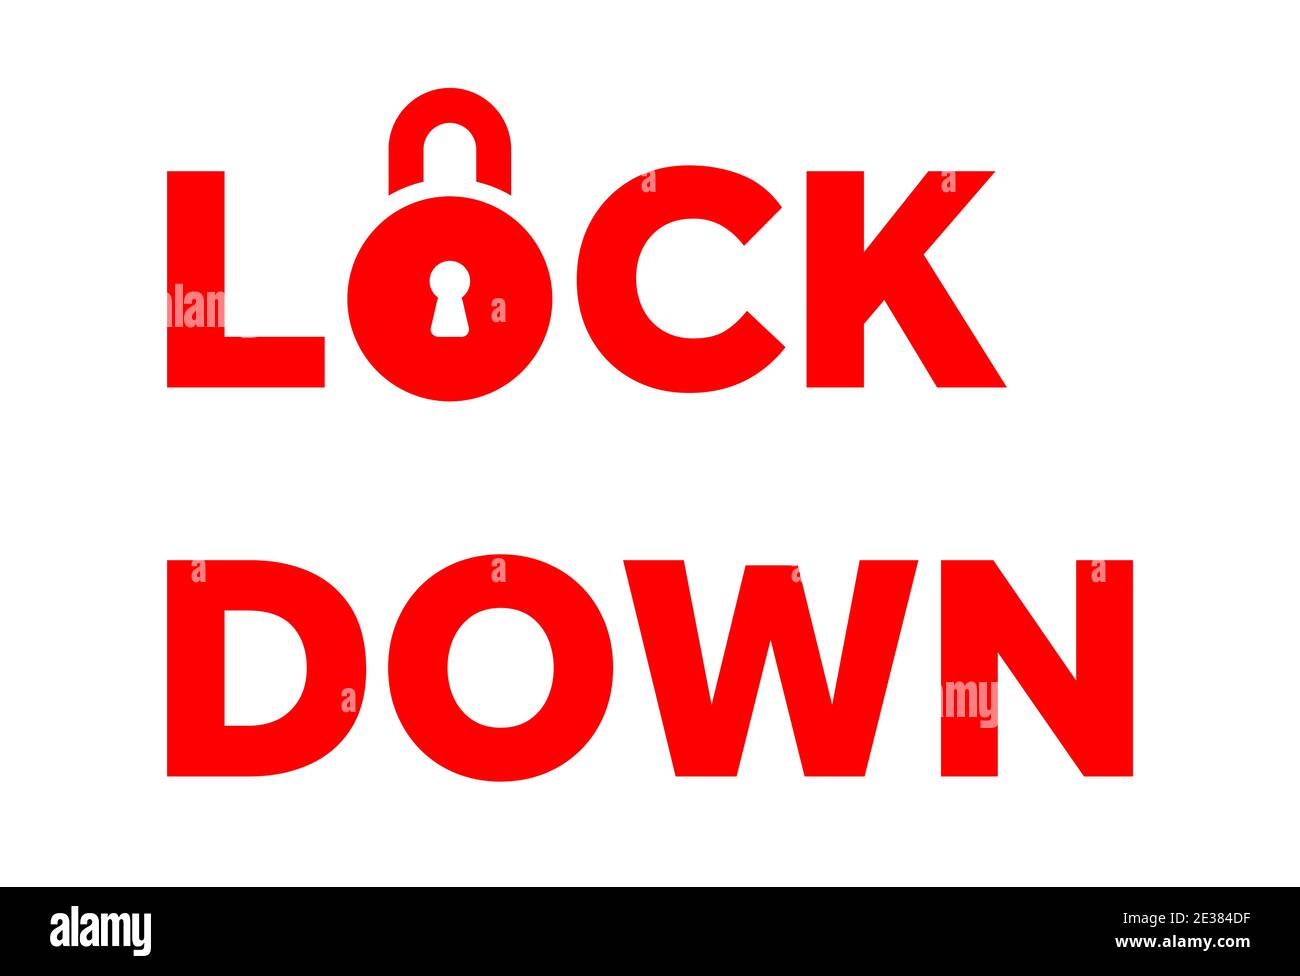 Lockdown text with padlock icon vector illustration Stock Vector